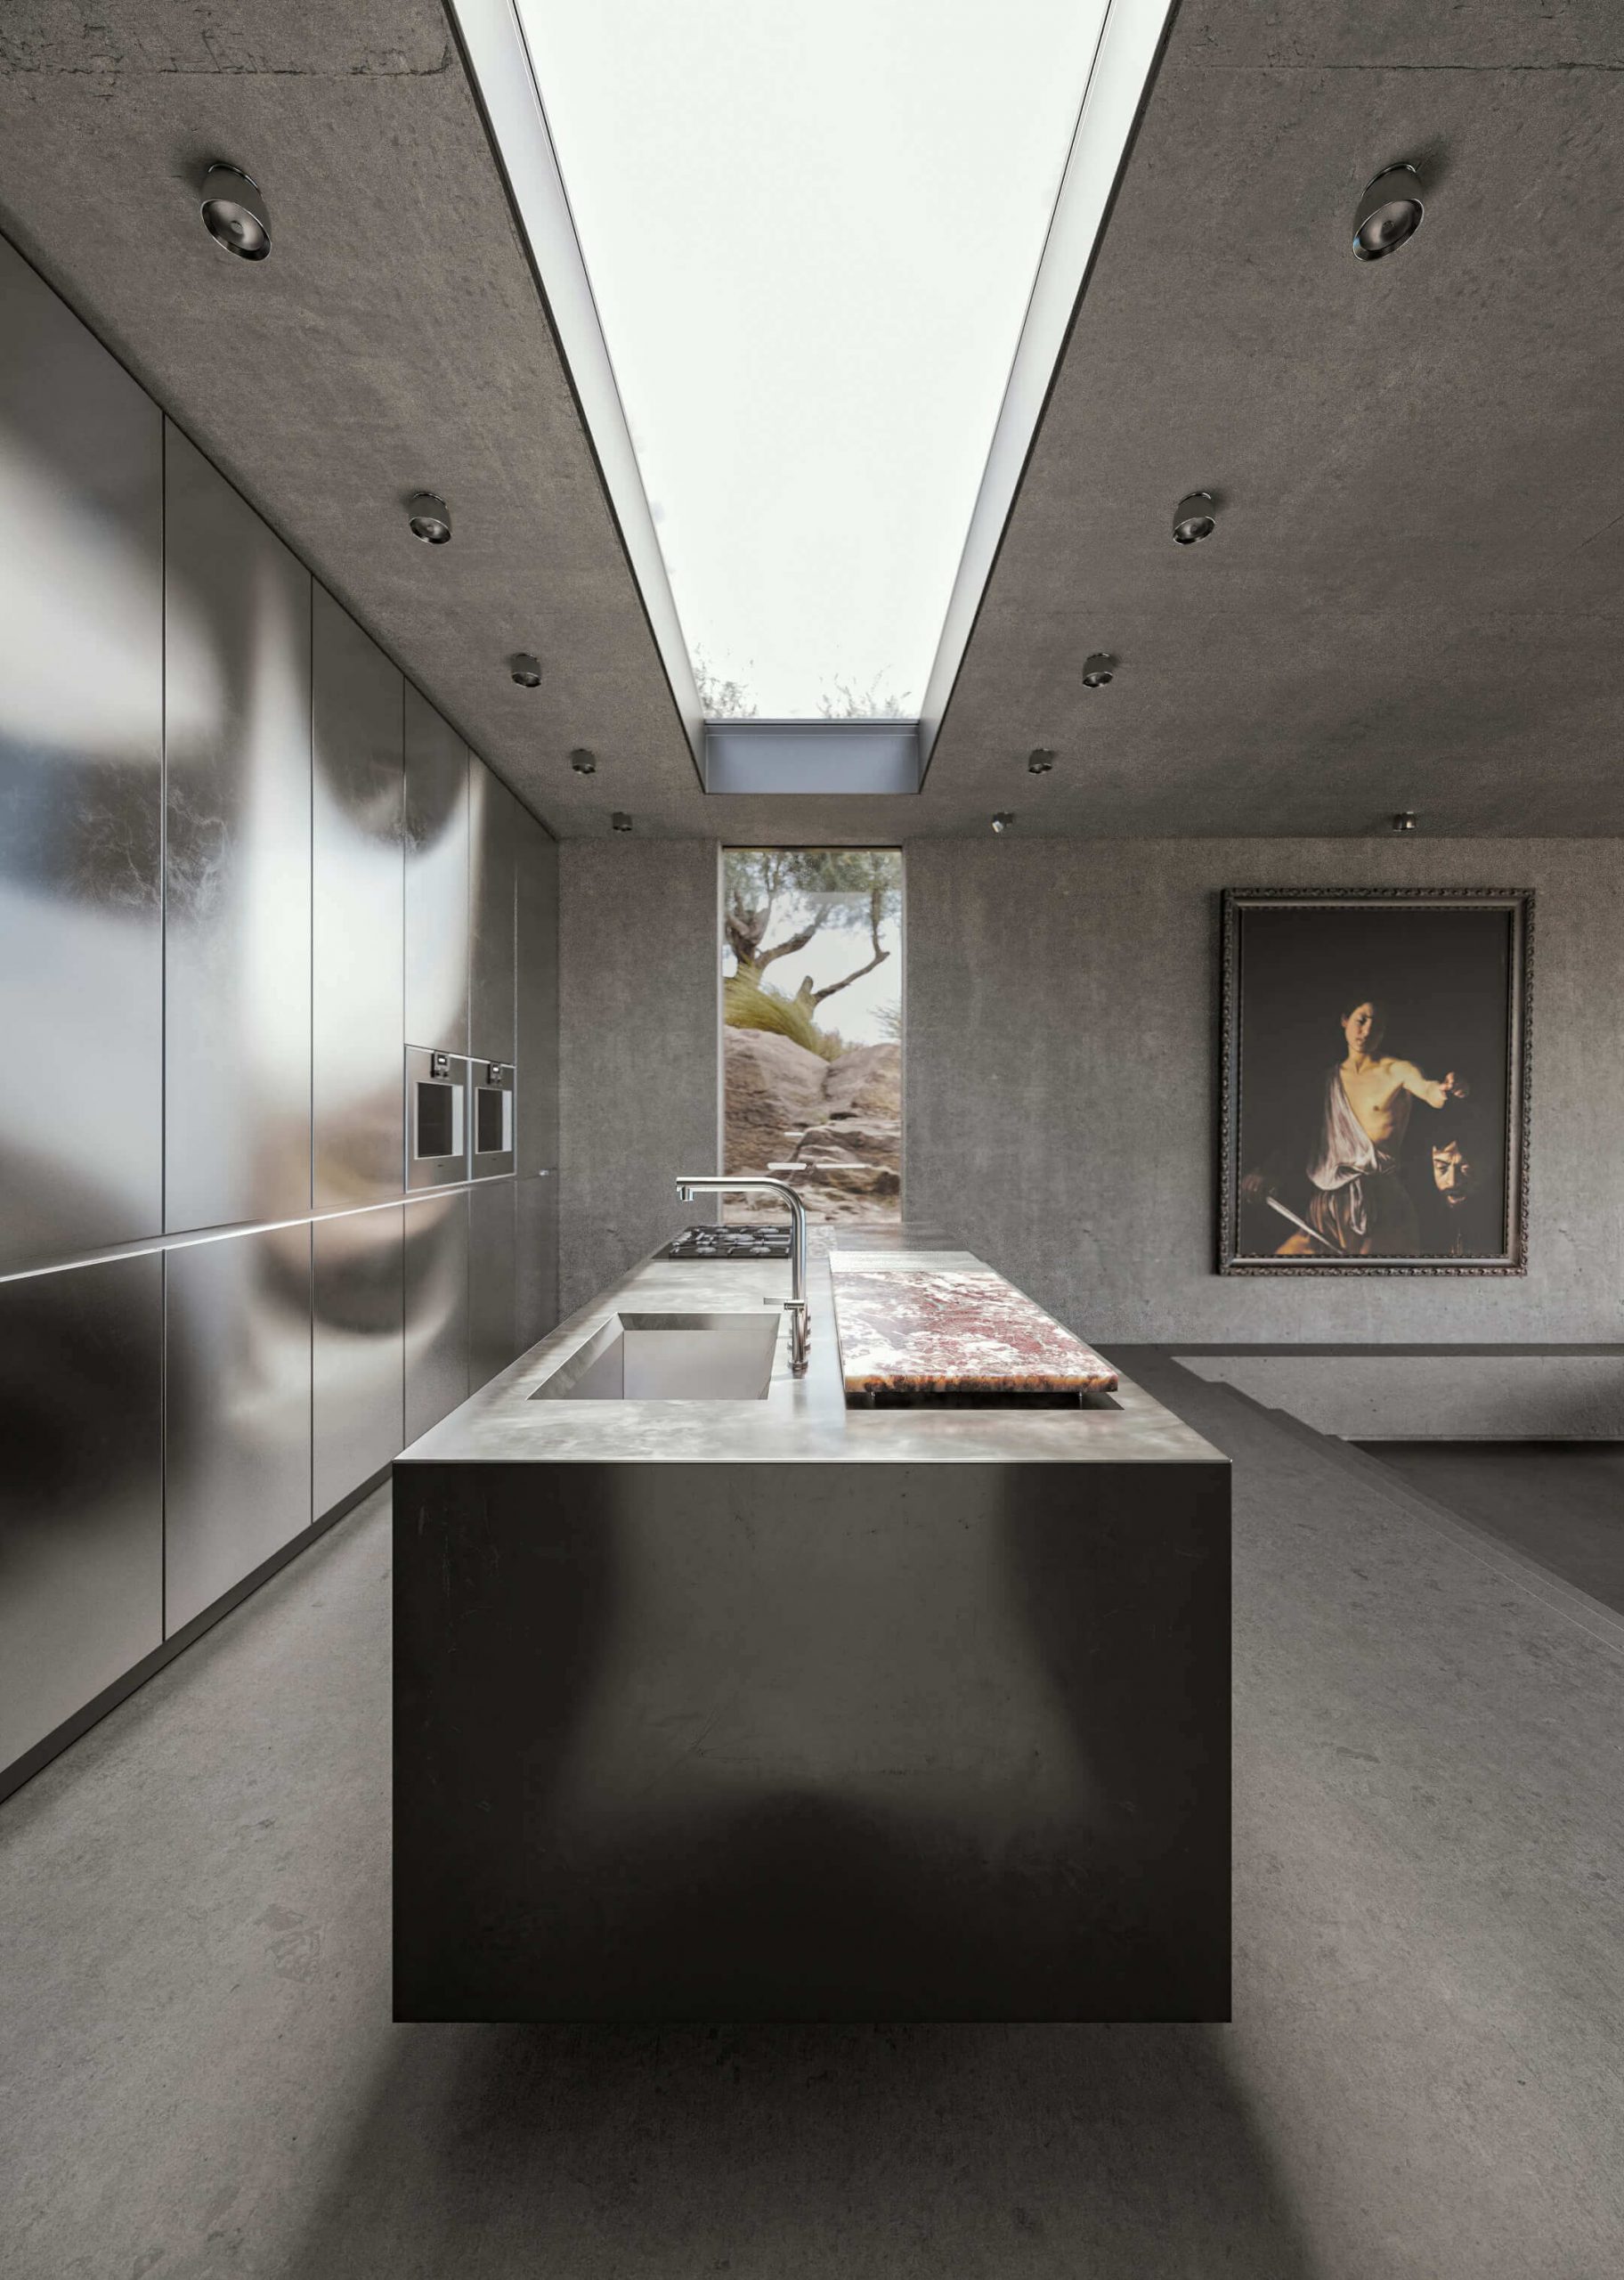 A Final 3D Visualization of the Kitchen